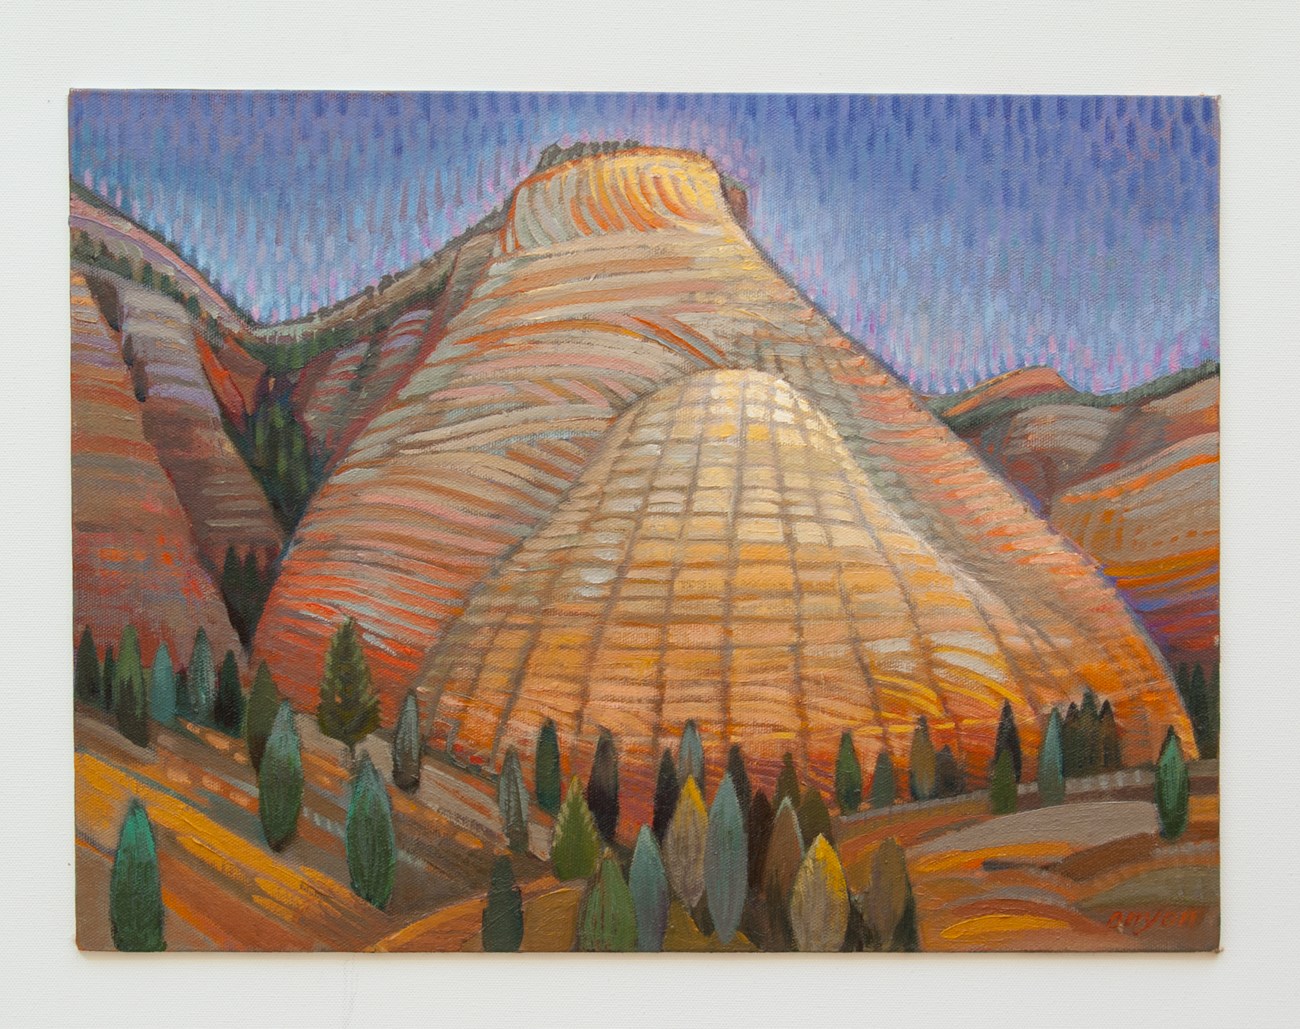 An image of Zion's checkerboard mesa is illustrated in vibrant oil colors of reds, oranges, and golds.